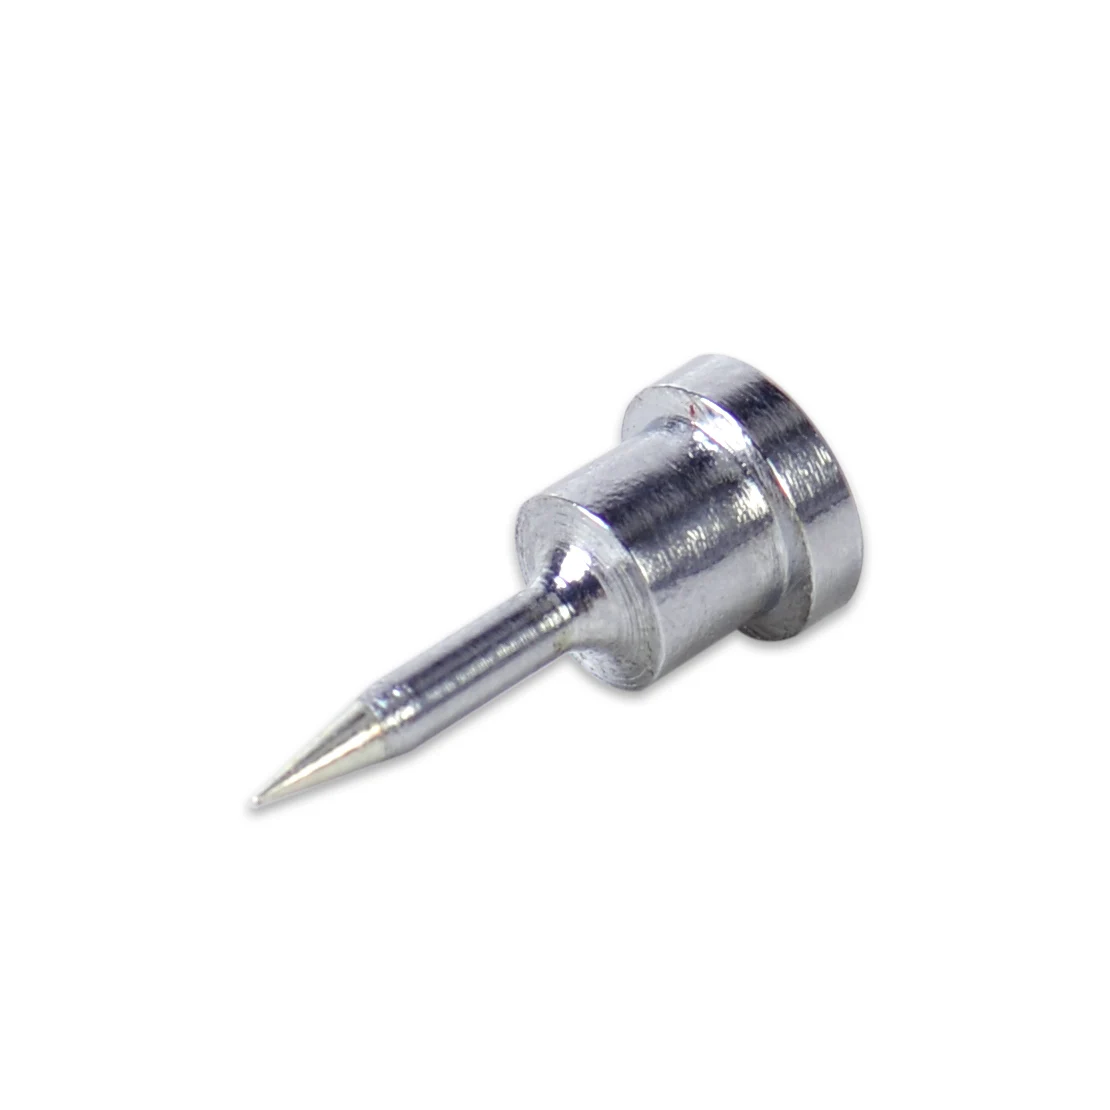 New Weller WSP80 Soldering Irons Pencil Handle FOR For WSD81 WS81